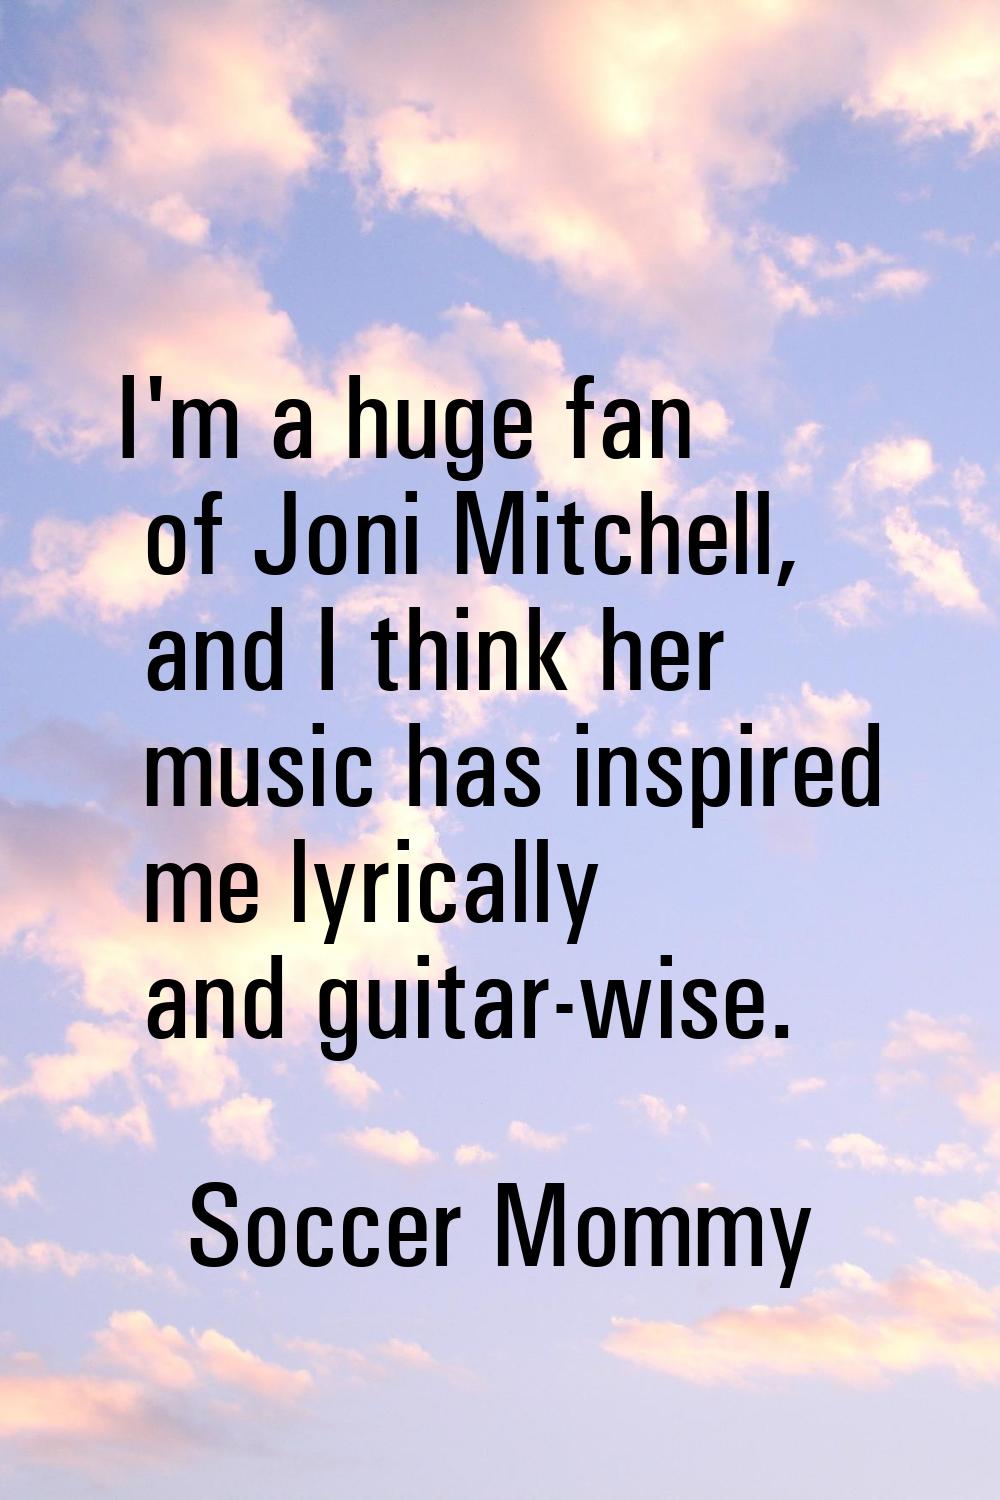 I'm a huge fan of Joni Mitchell, and I think her music has inspired me lyrically and guitar-wise.